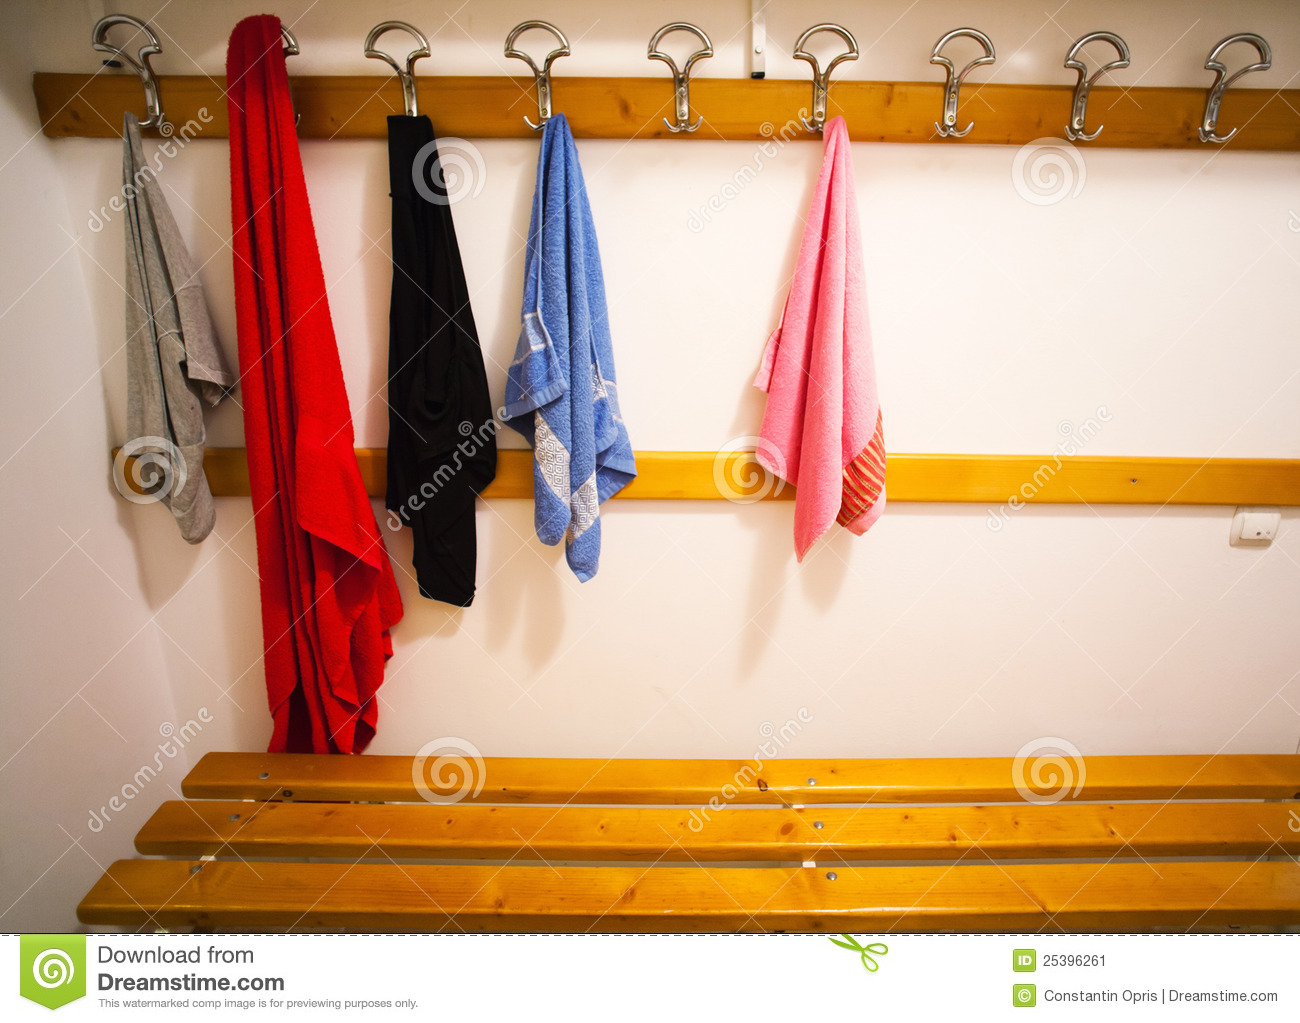 Towels In Changing Room Stock Image   Image  25396261